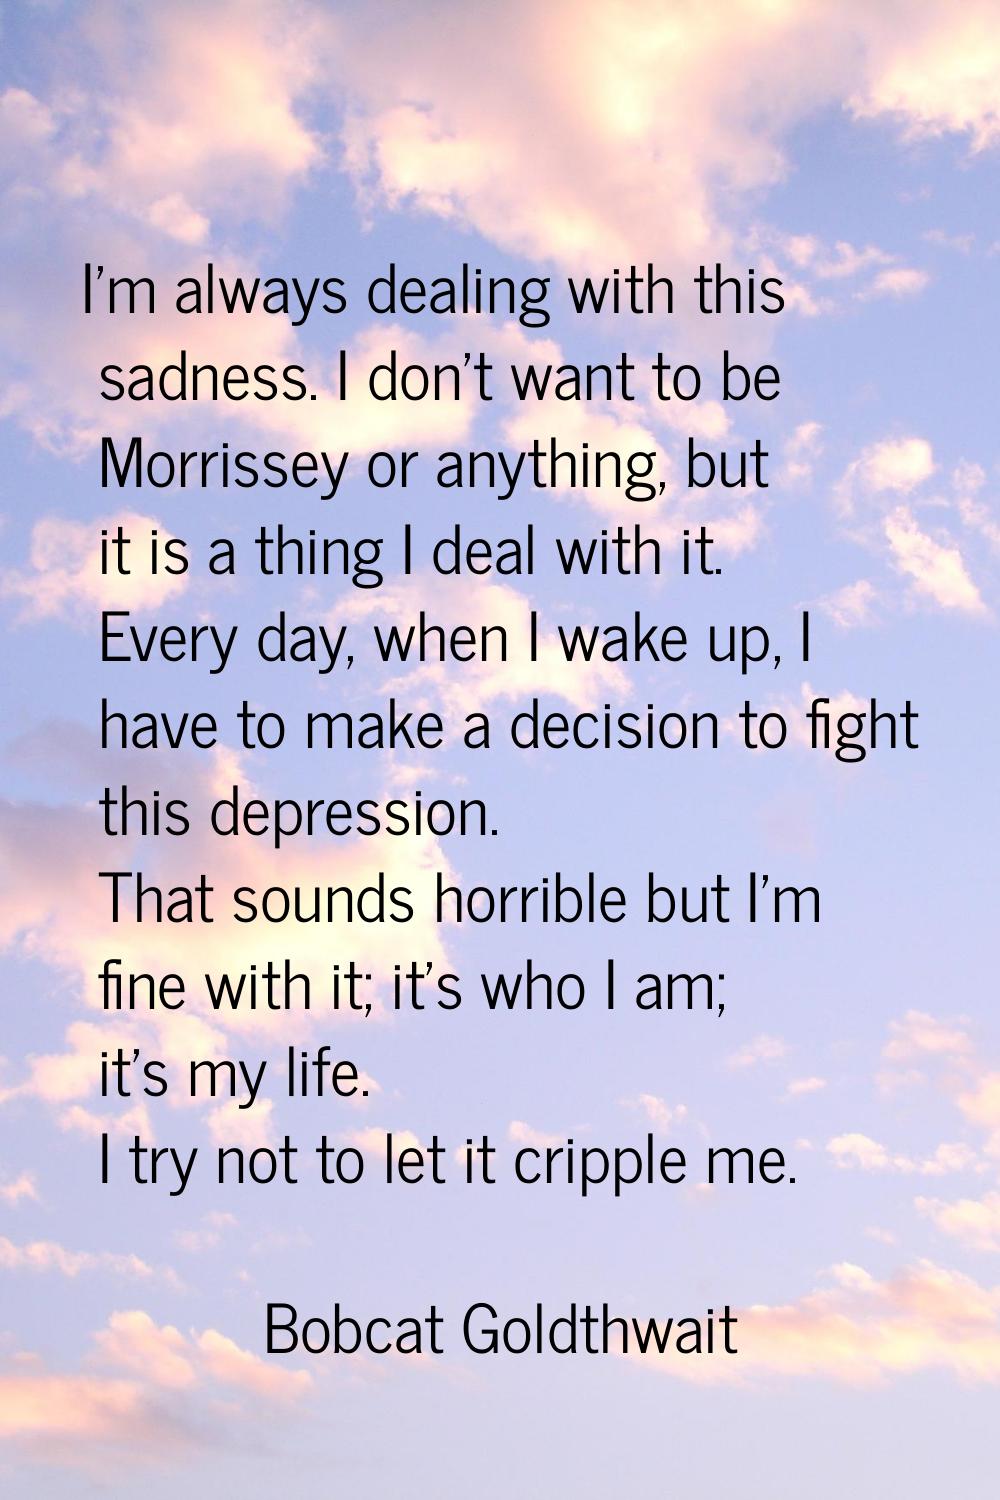 I'm always dealing with this sadness. I don't want to be Morrissey or anything, but it is a thing I